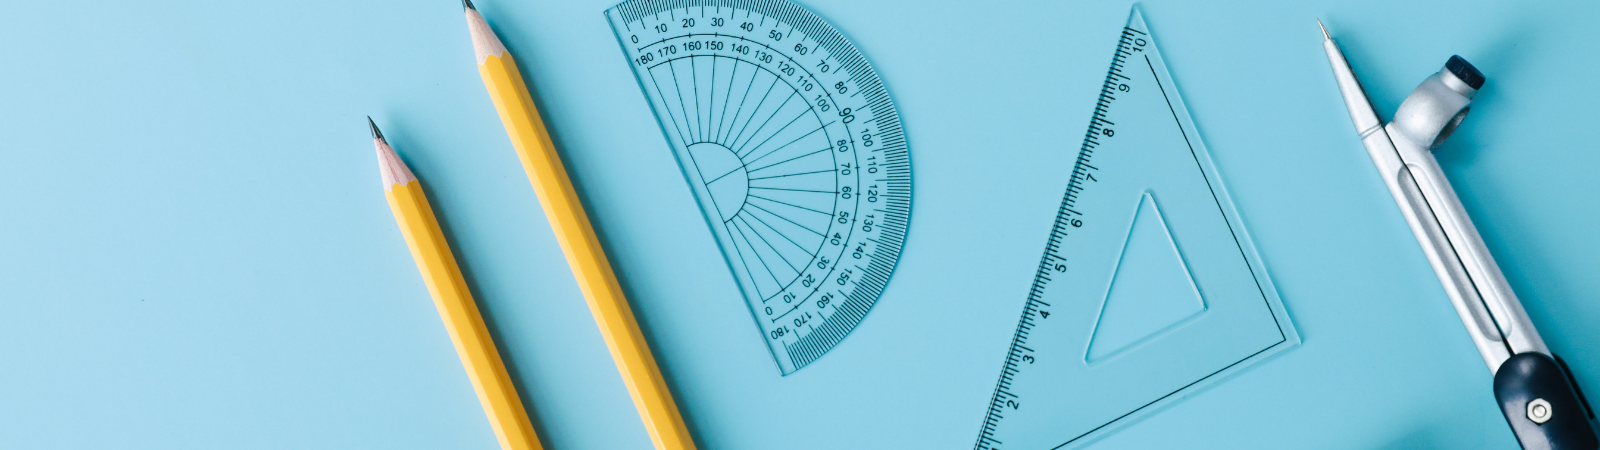 Pencils and protractors on a surface